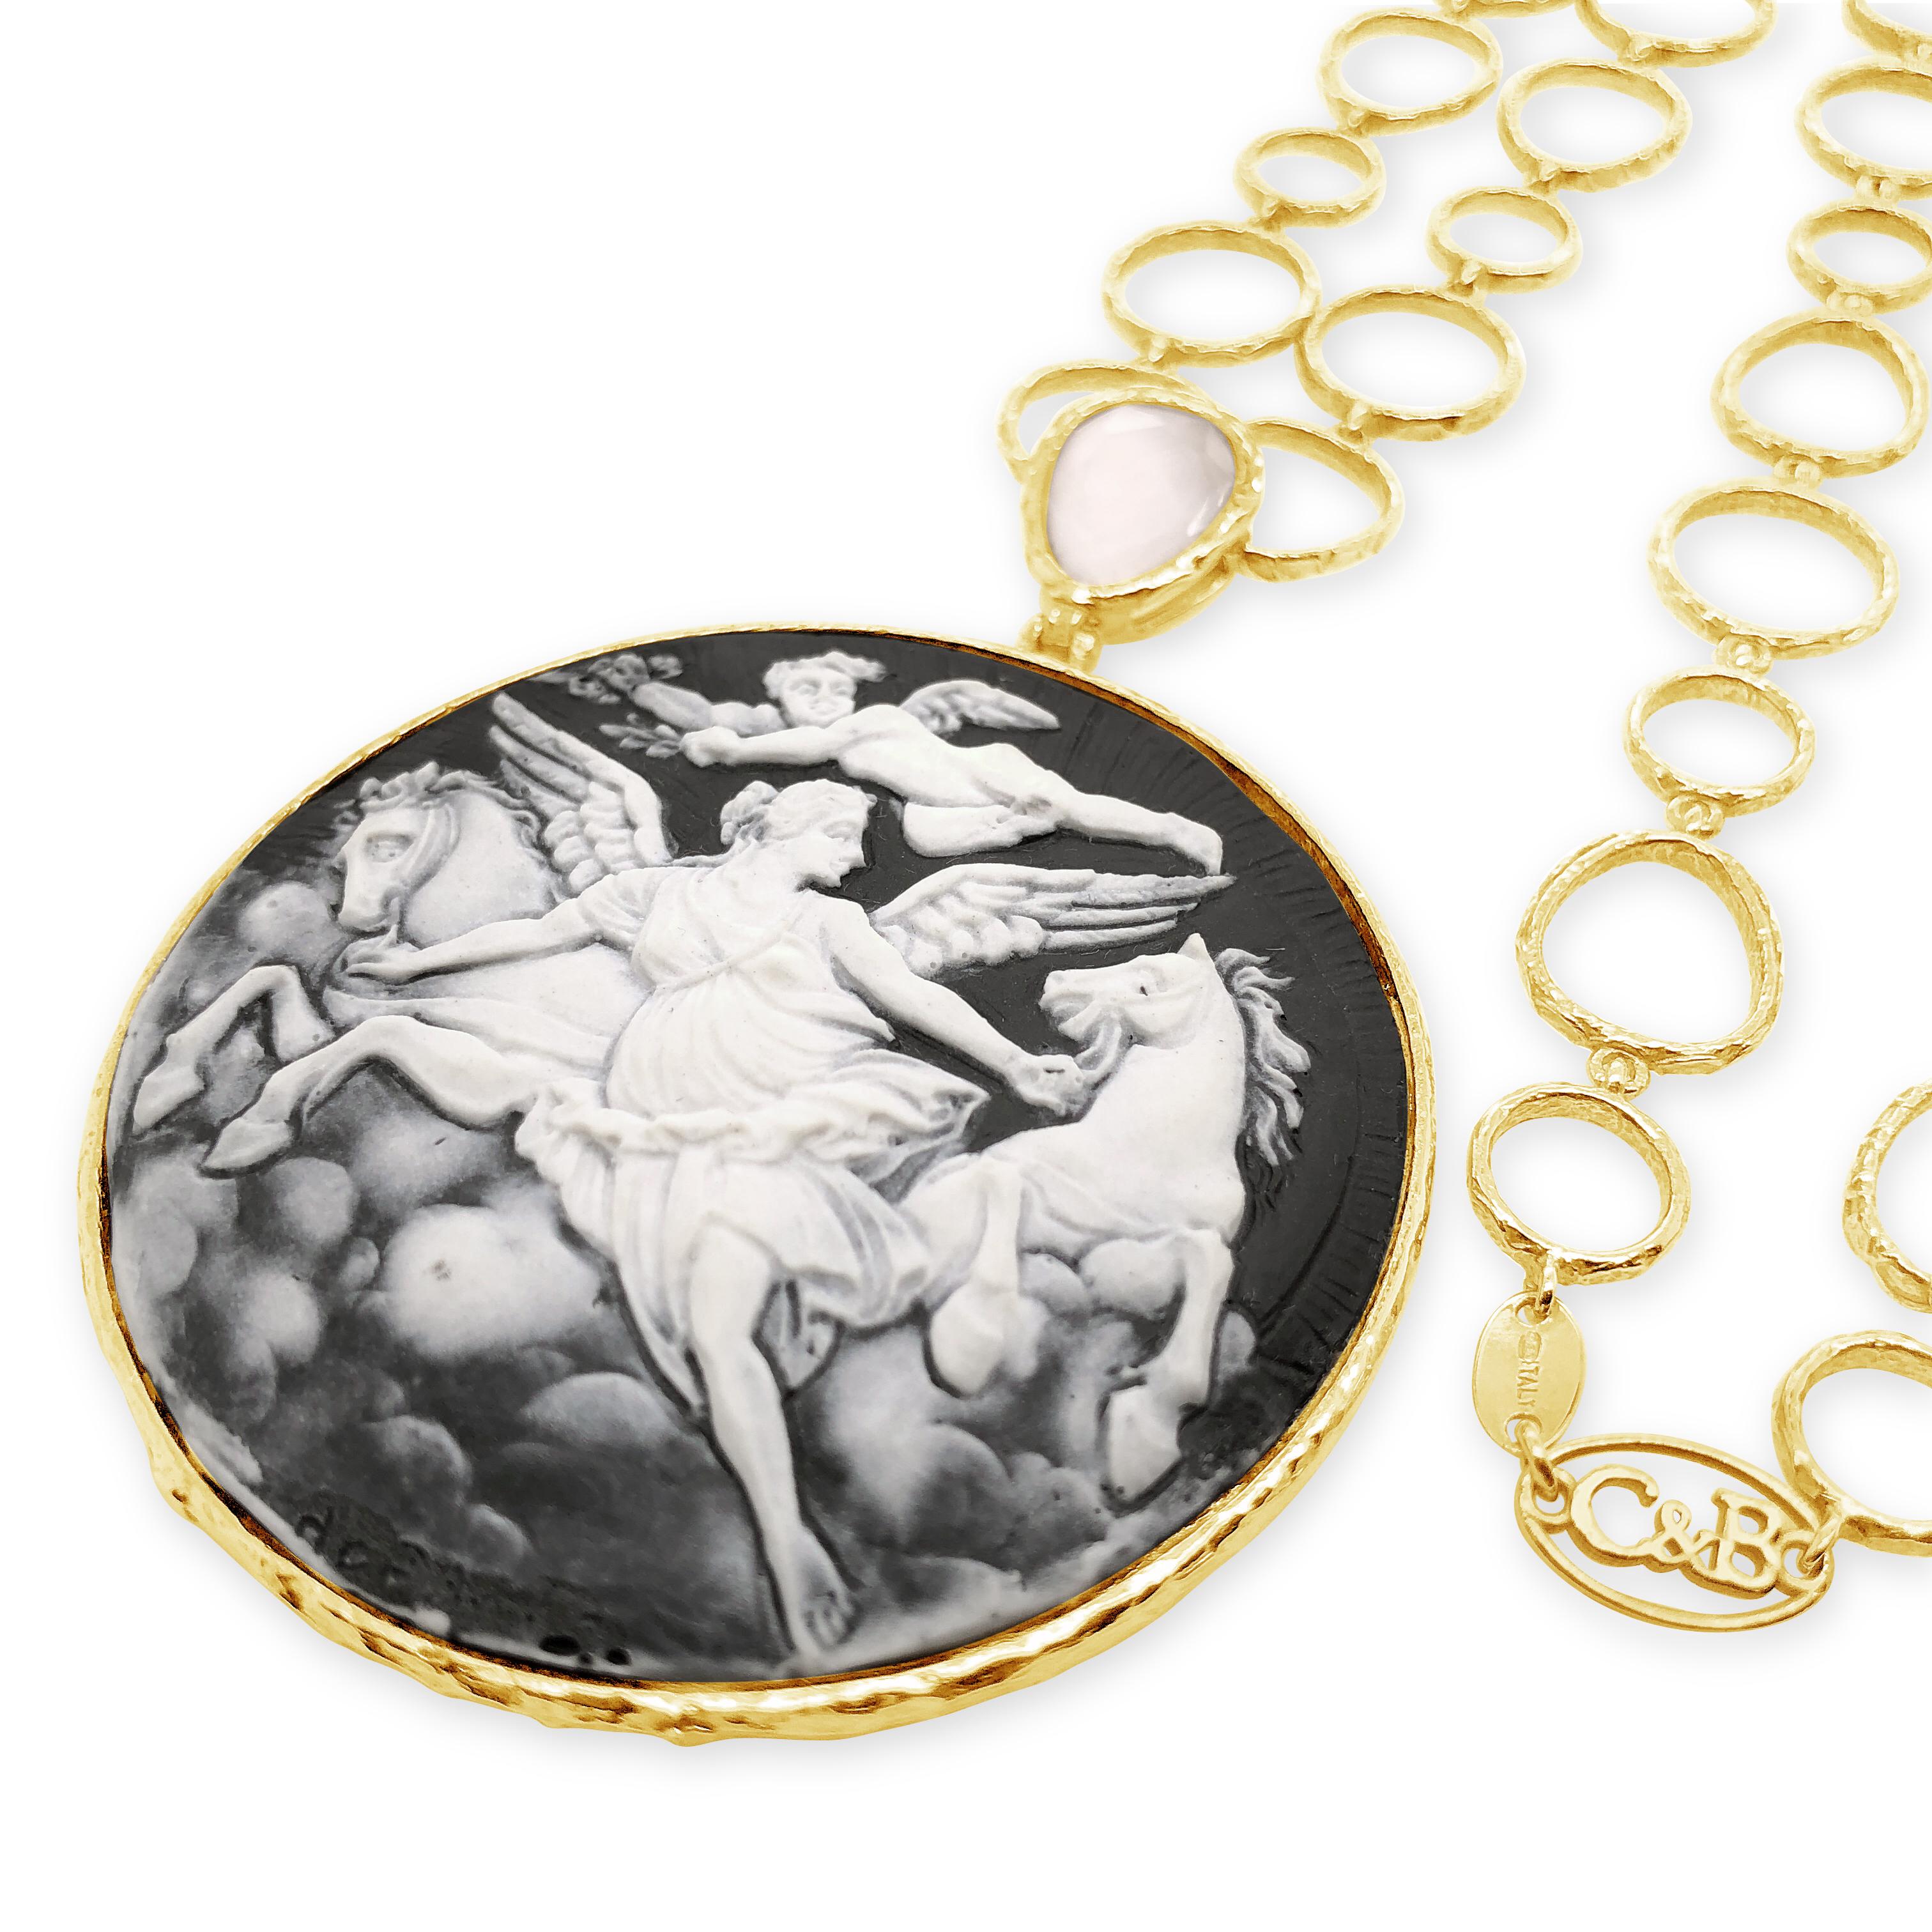 Finely detailed porcelain cameo depicting a scene with guardian angel and cherub. Bold and elegant, this is the ideal statement piece to include in your jewellery collection. Beautifully hand crafted, mounted in 18k yellow gold vermeil, this design